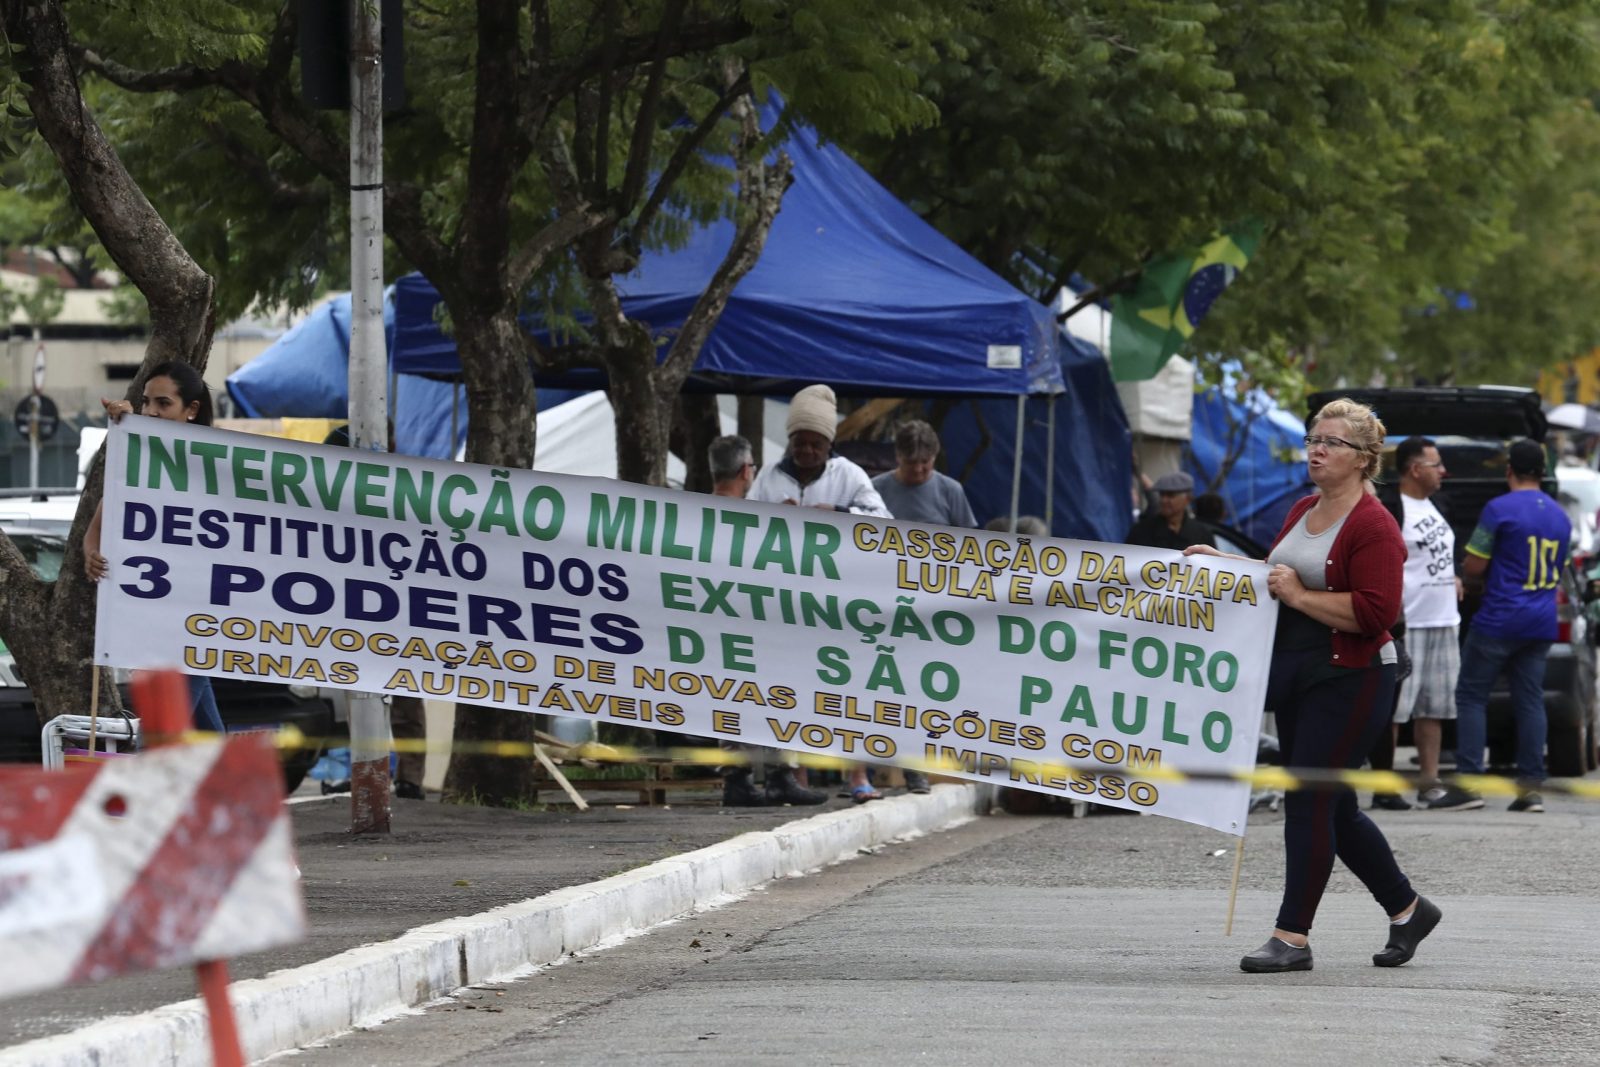 epa10397114 Followers of former President Jair Bolsonaro leave a camp in front of the Army Headquarters, in Sao Paulo, Brazil, 09 January 2023. Several camps that brought together Bolsonaro radicals in front of the Army headquarters were dismantled, including those in the main cities of the country, after the attacks on 08 January at the headquarters of the national Congress, Presidential Palace and Supreme Court, in an attempted coup d'état.  EPA/SEBASTIAO MOREIRA